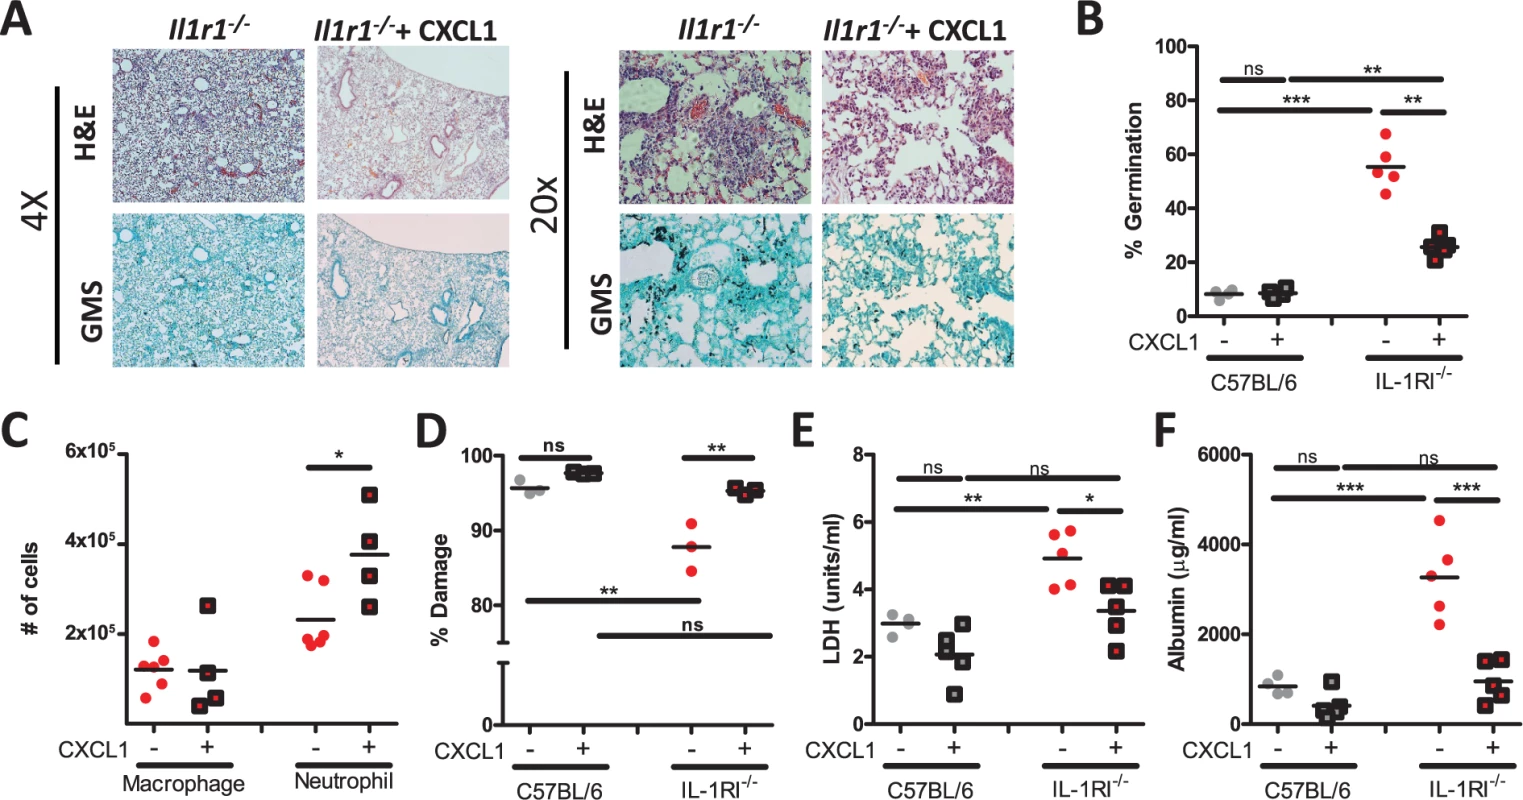 Treatment of <i>Il1r1</i>-deficient mice with CXCL1 partially increases resistance to <i>Aspergillus fumigatus</i> infection.